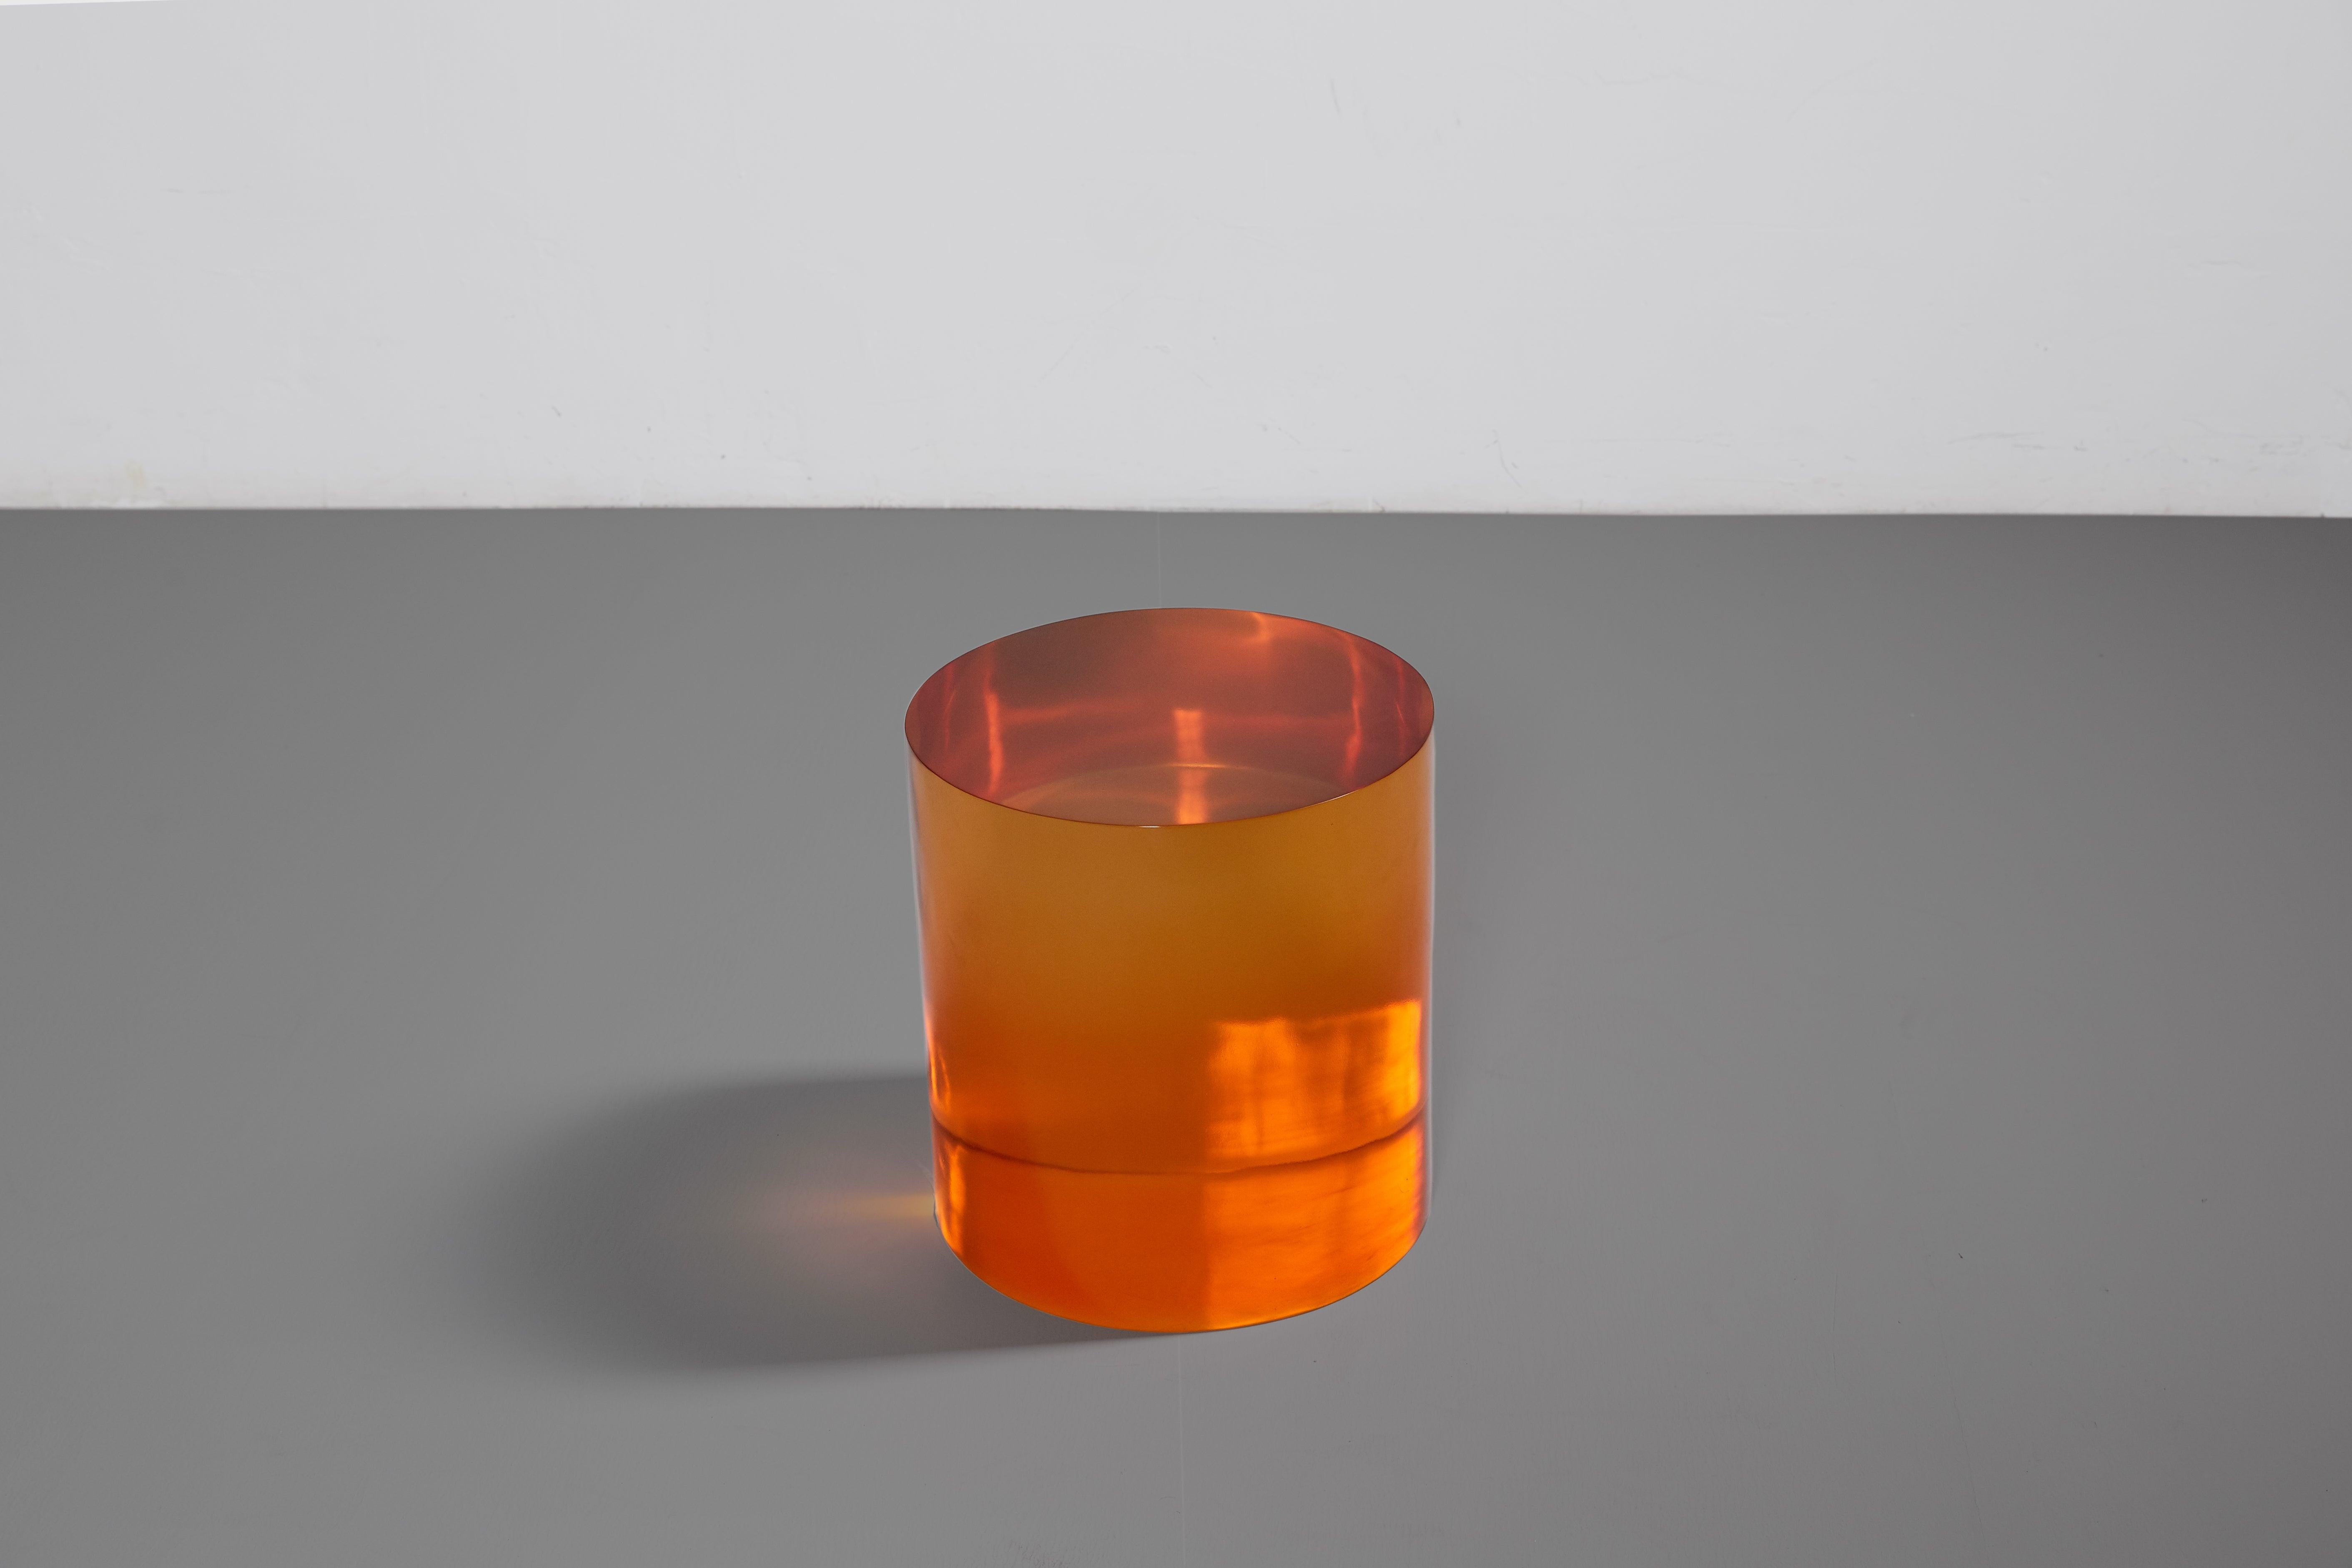 Chinese Seeing Through Your Illusions Sunset, Orange Translucent Resin Stool by Hua Wang For Sale